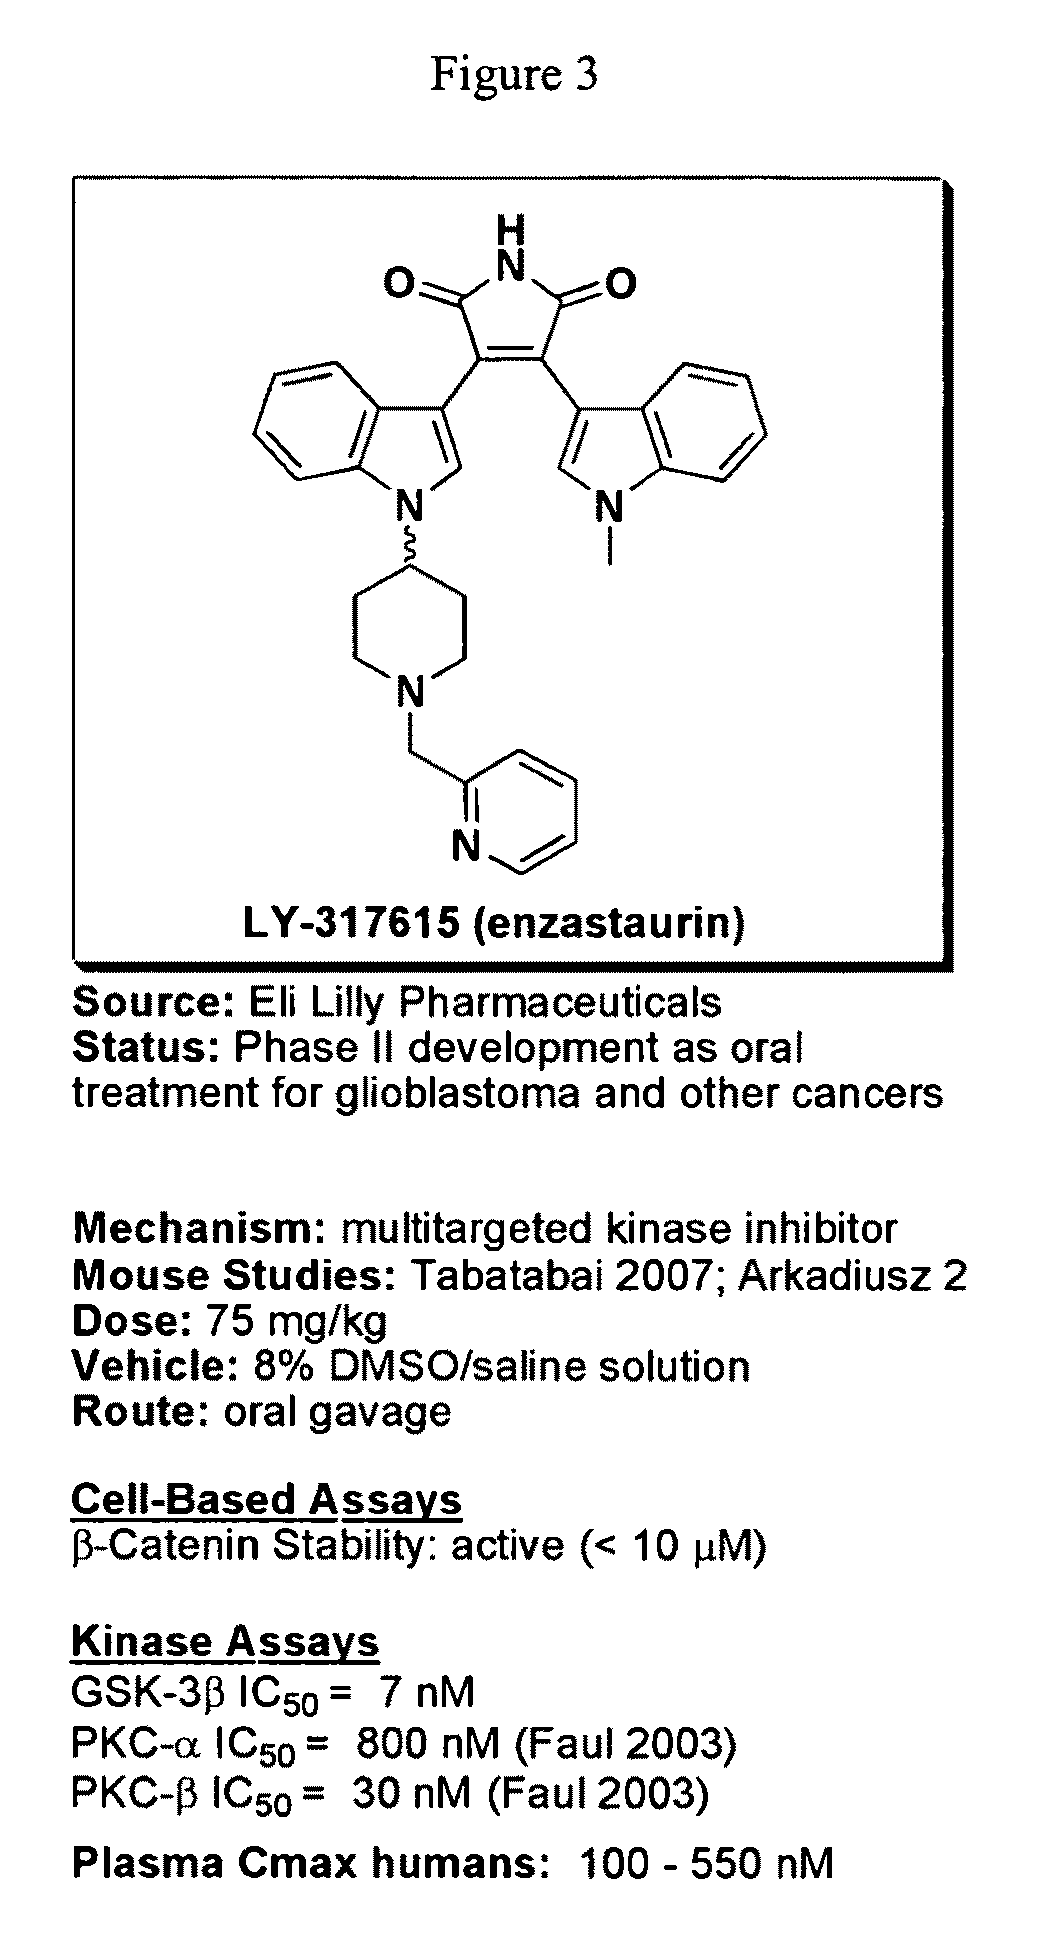 Uses of chemicals to modulate GSK-3 signaling for treatment of bipolar disorder and other brain disorders